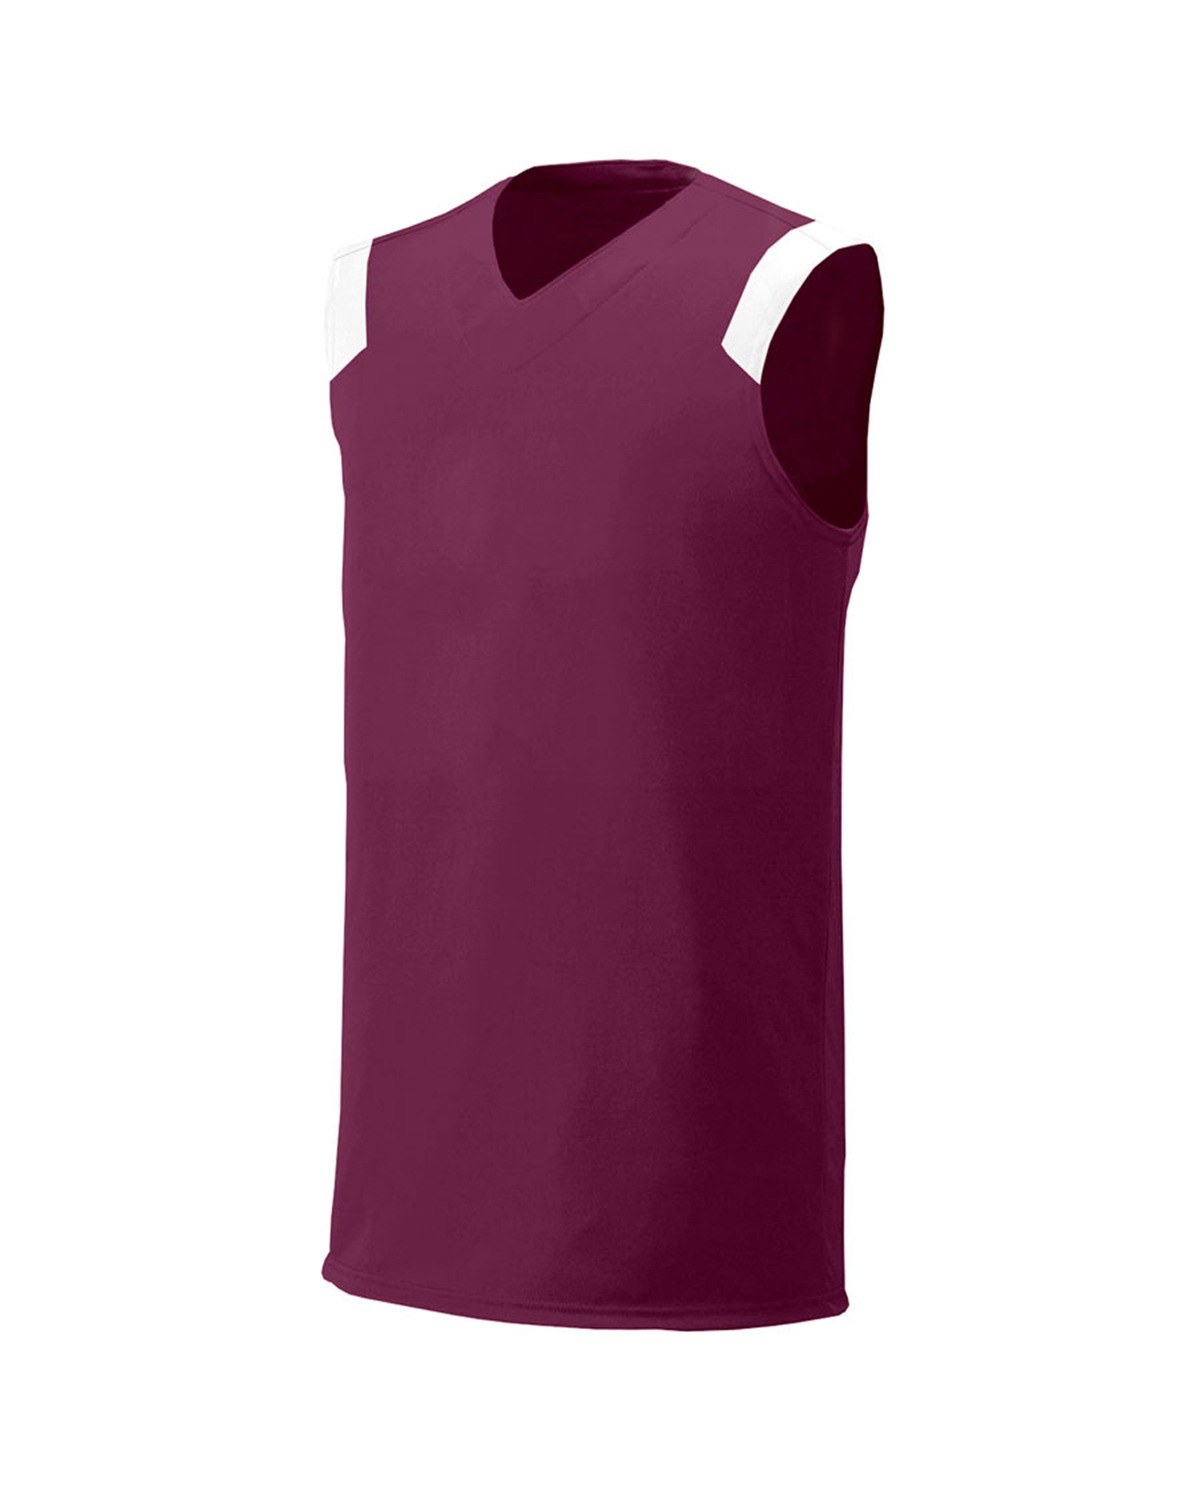 NB2340 A4 Youth Moisture Management V Neck Muscle Shirt